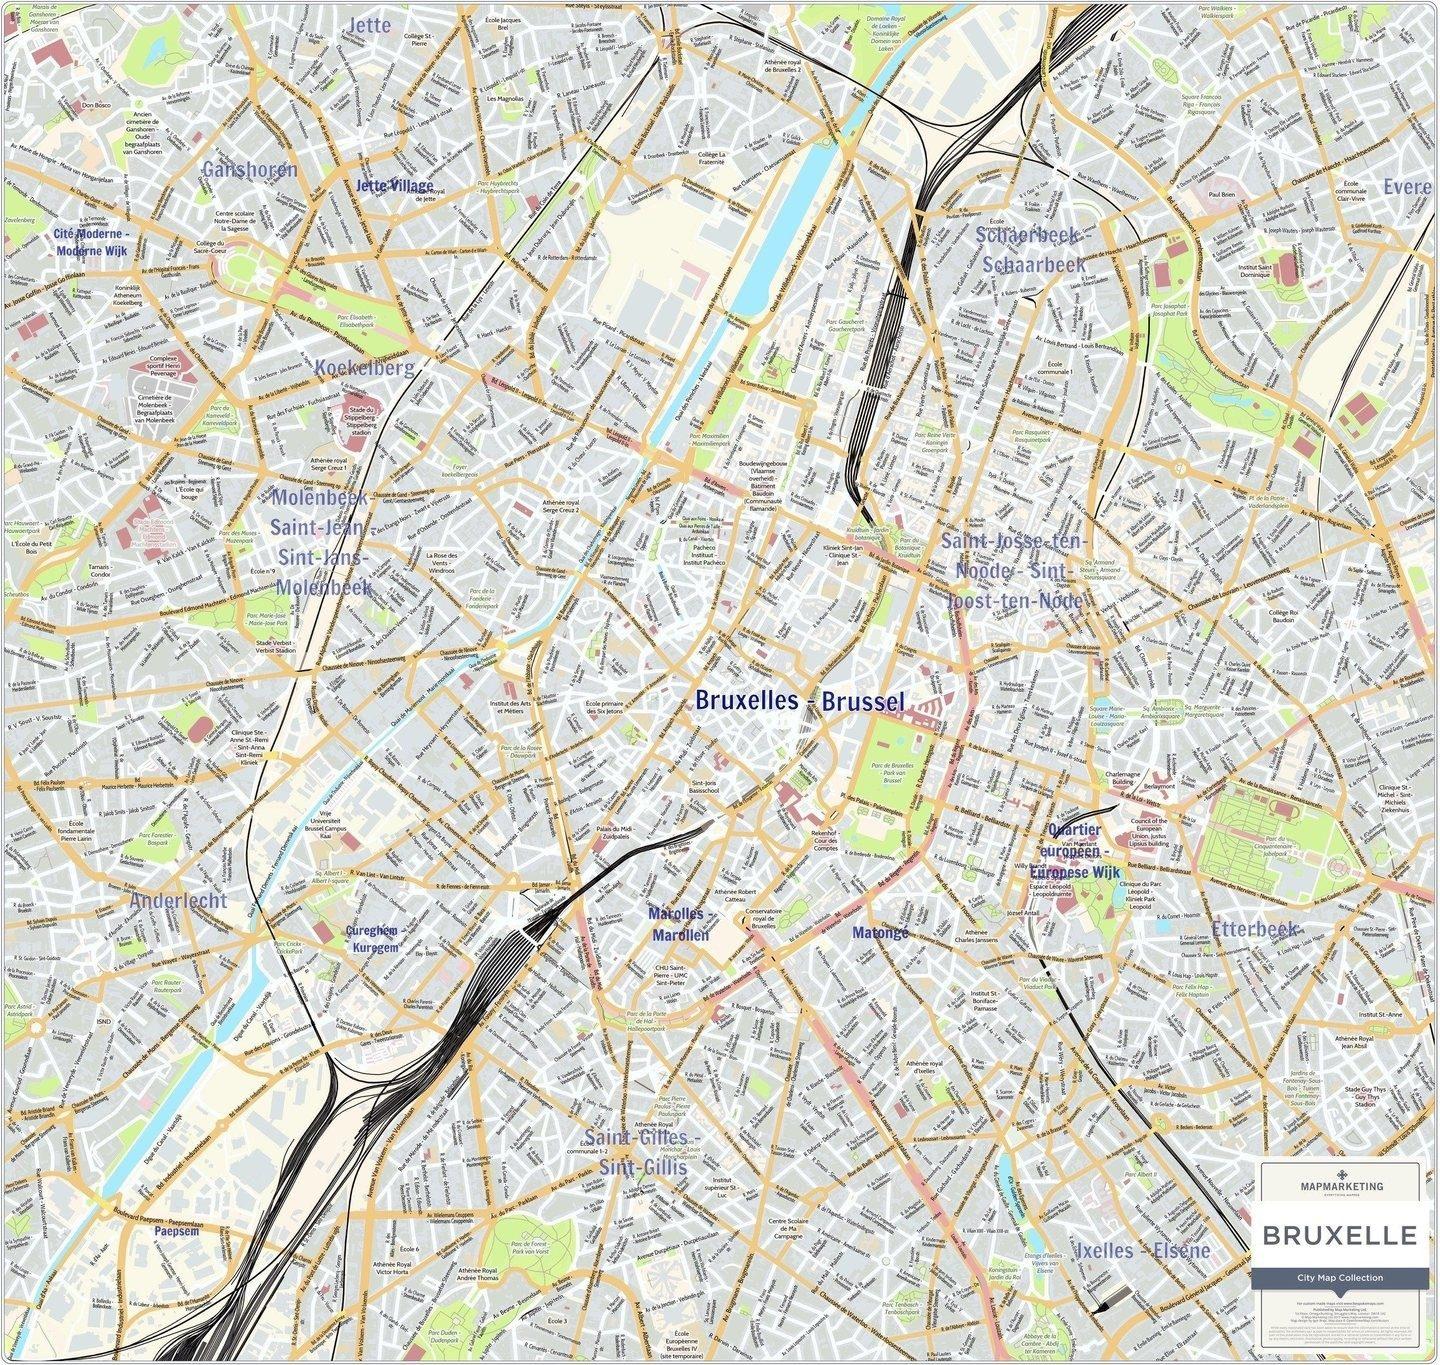 map-of-brussels-offline-map-and-detailed-map-of-brussels-city